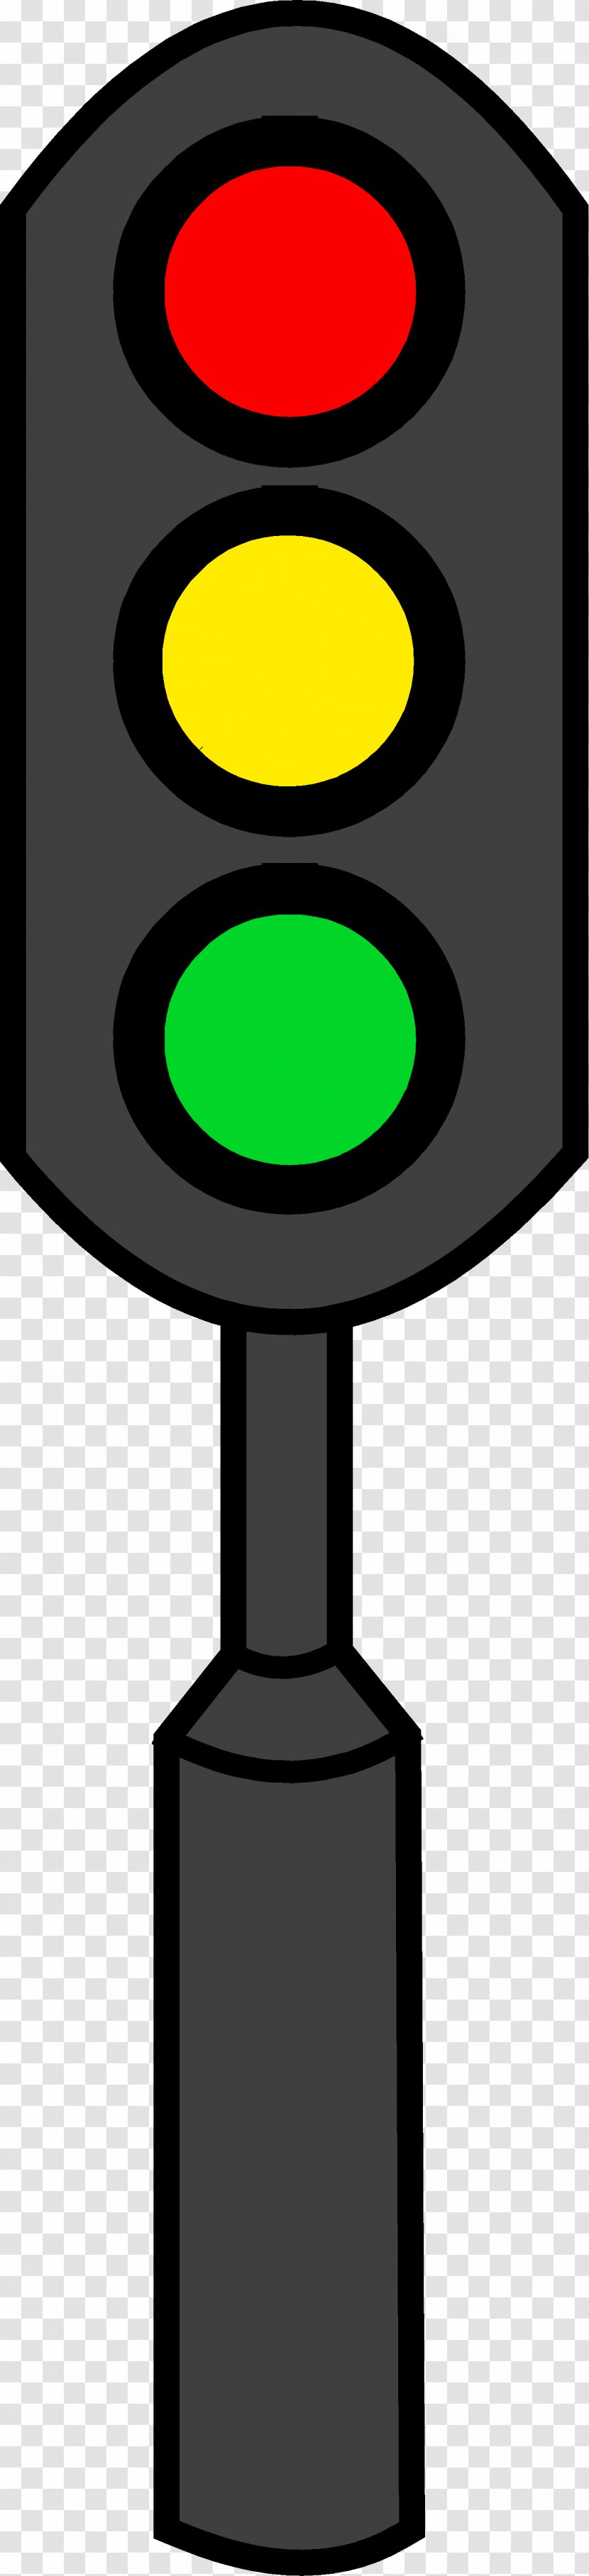 Traffic Light Free Content Clip Art - Stockxchng - Signal Cliparts Transparent PNG